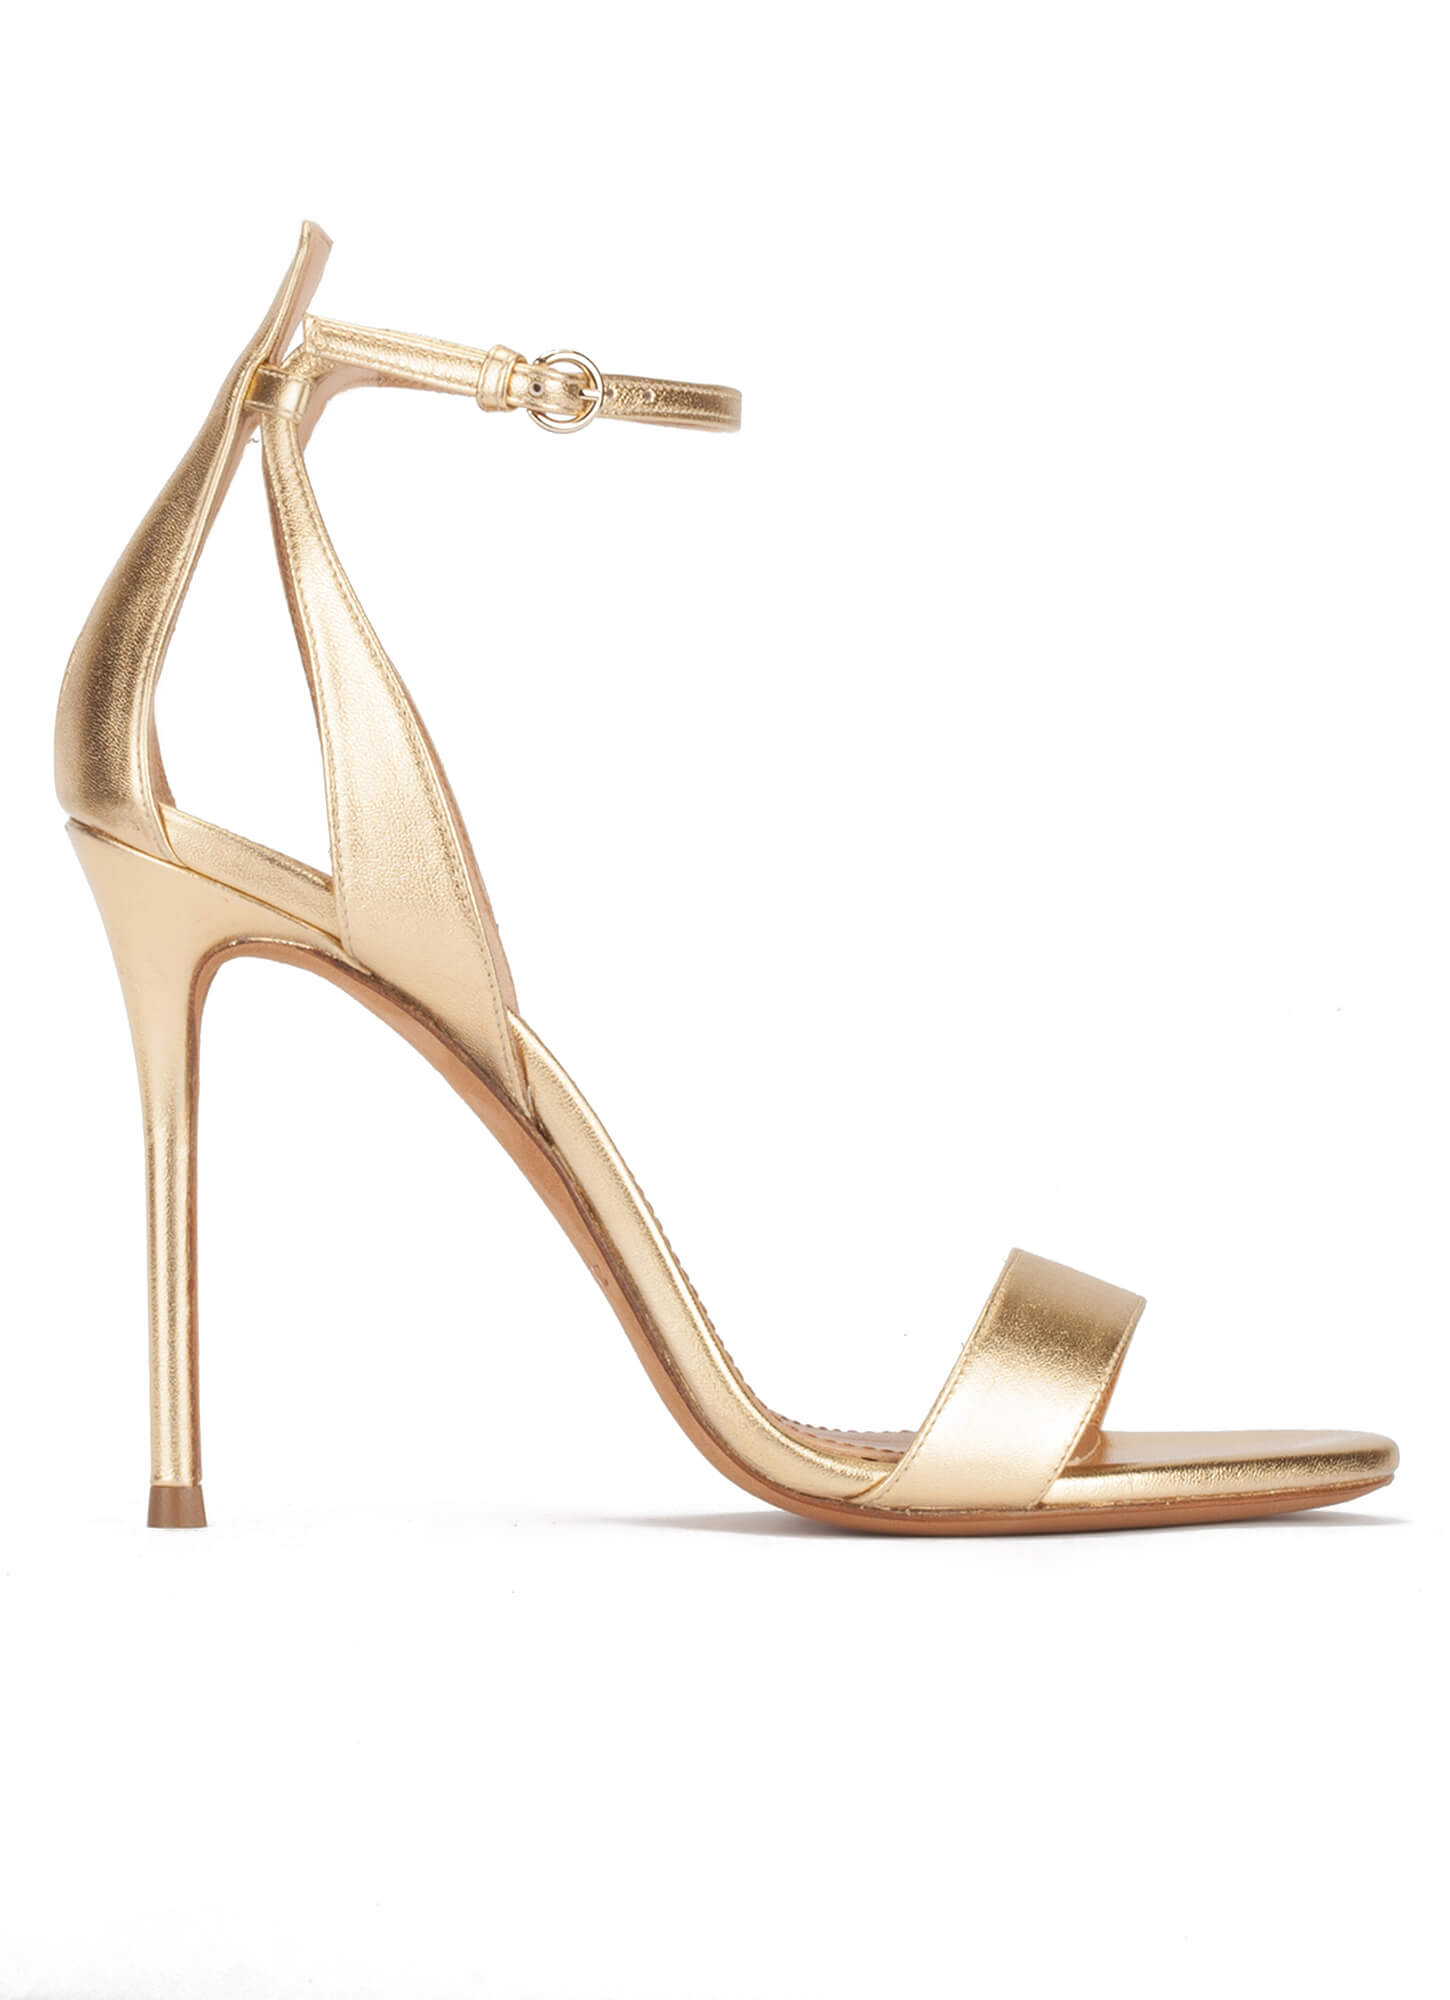 Ankle-strap high heeled sandals in gold 